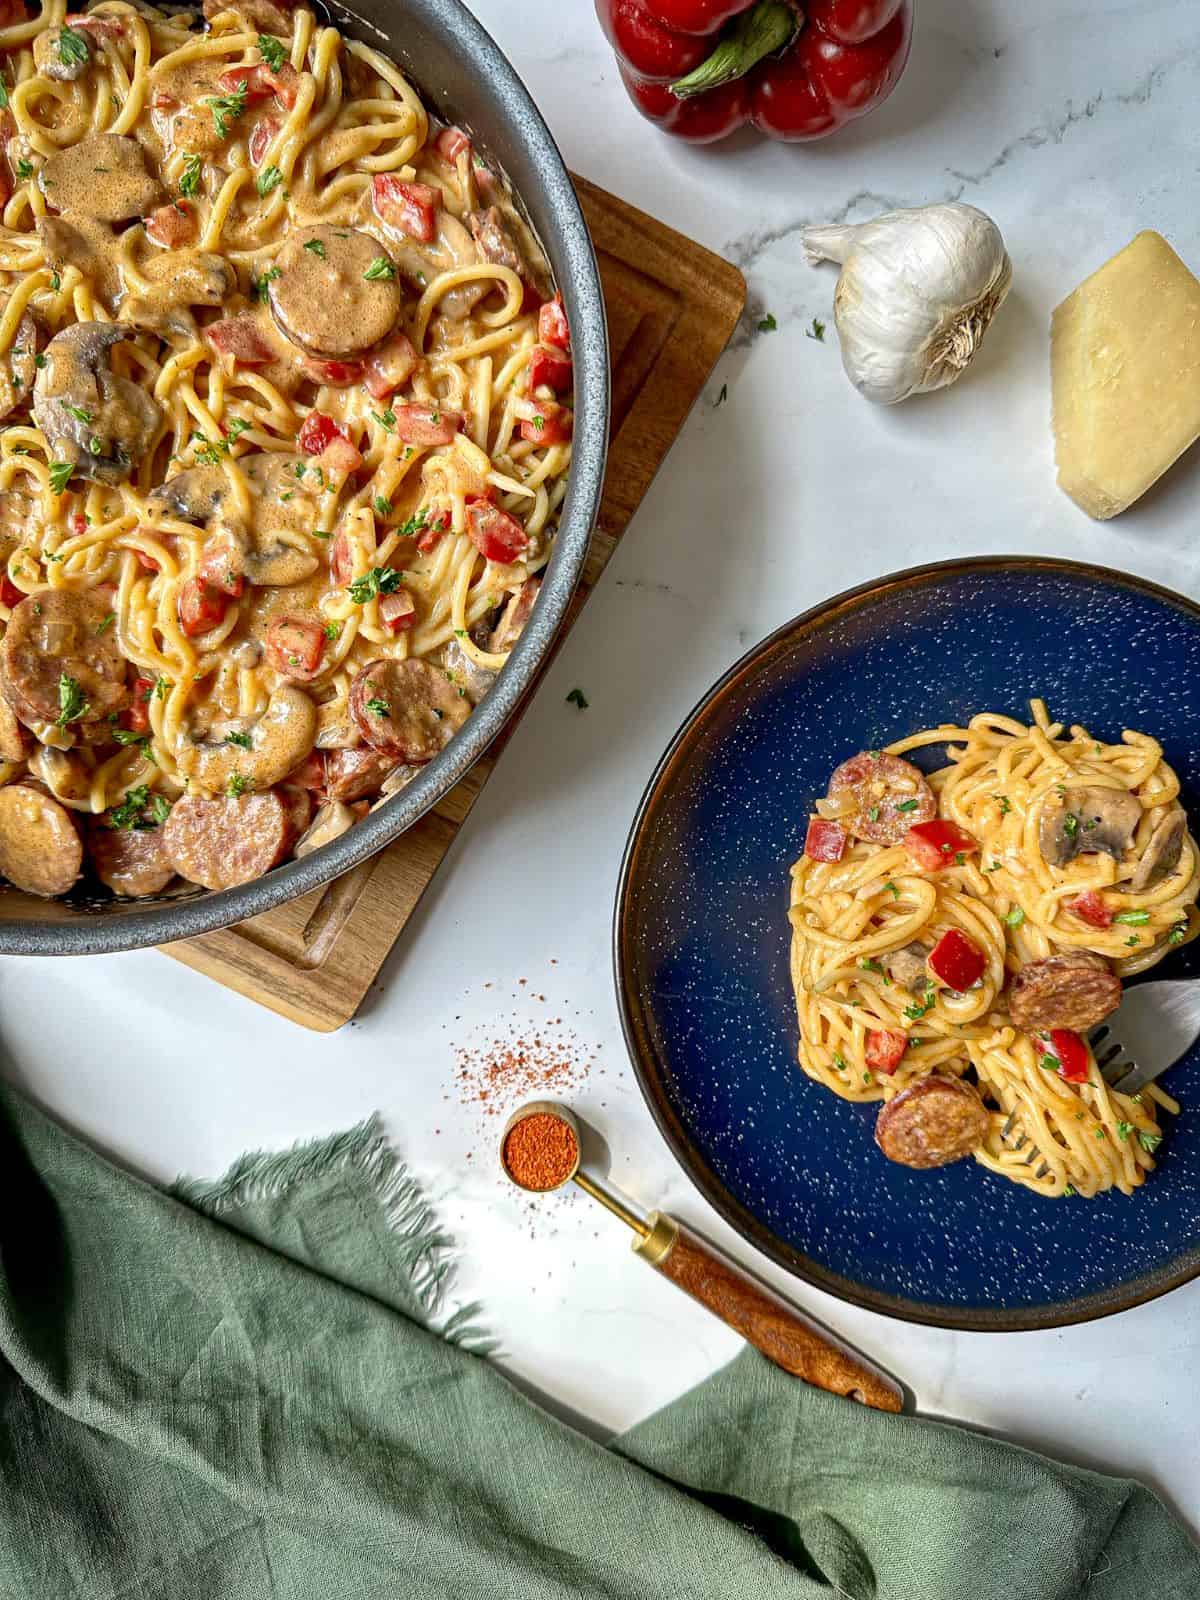 A skillet of Cajun spaghetti with sausage, peppers, and mushrooms next to a blue plate with a serving size and fork.